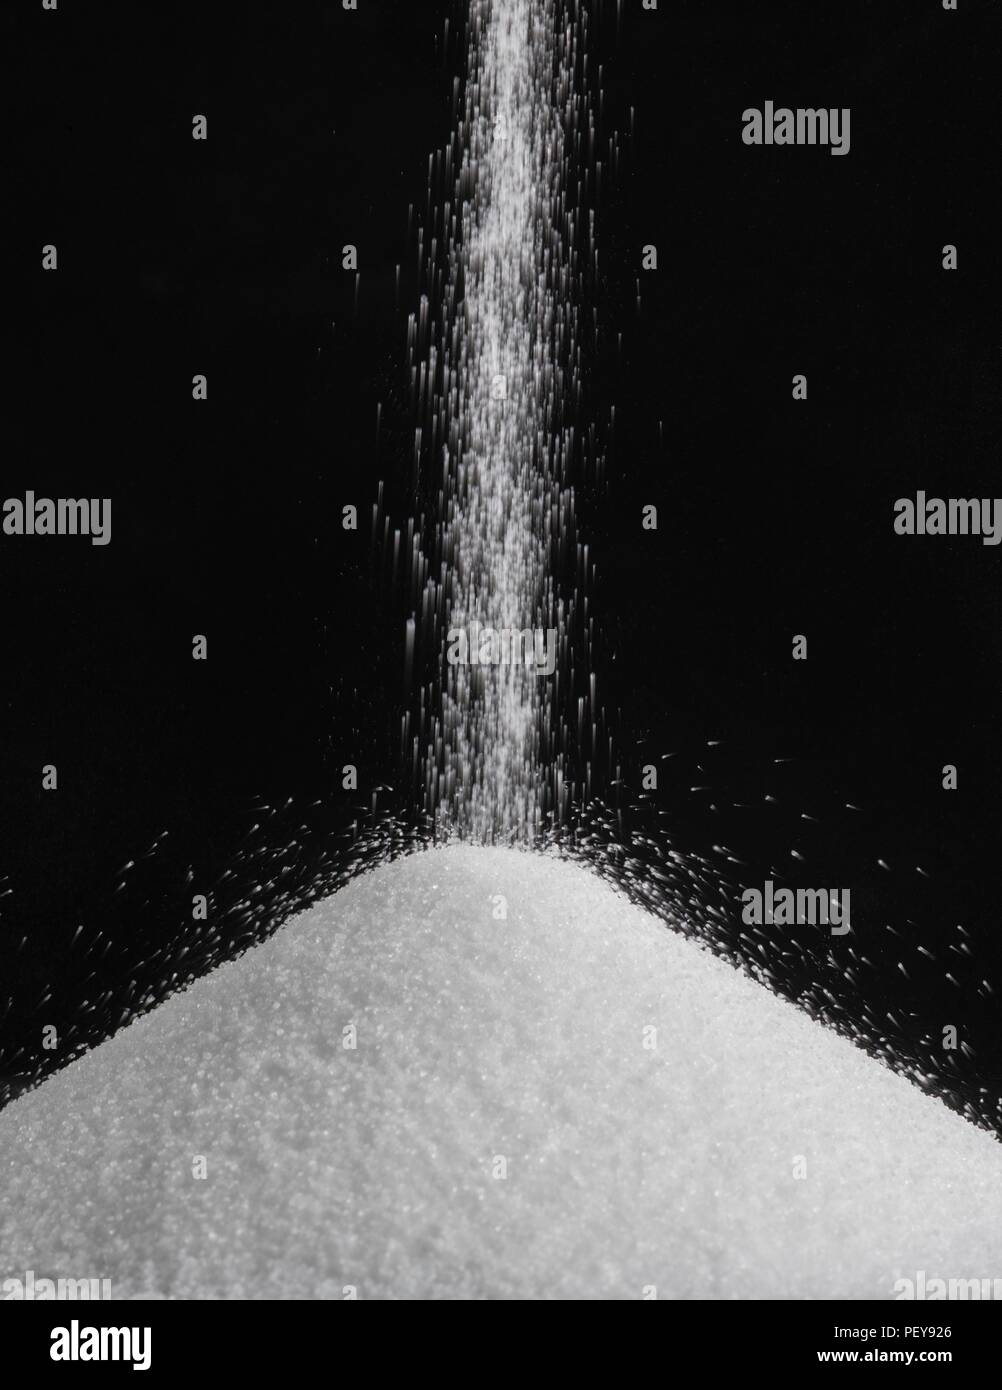 Salt pouring into a pile. Stock Photo